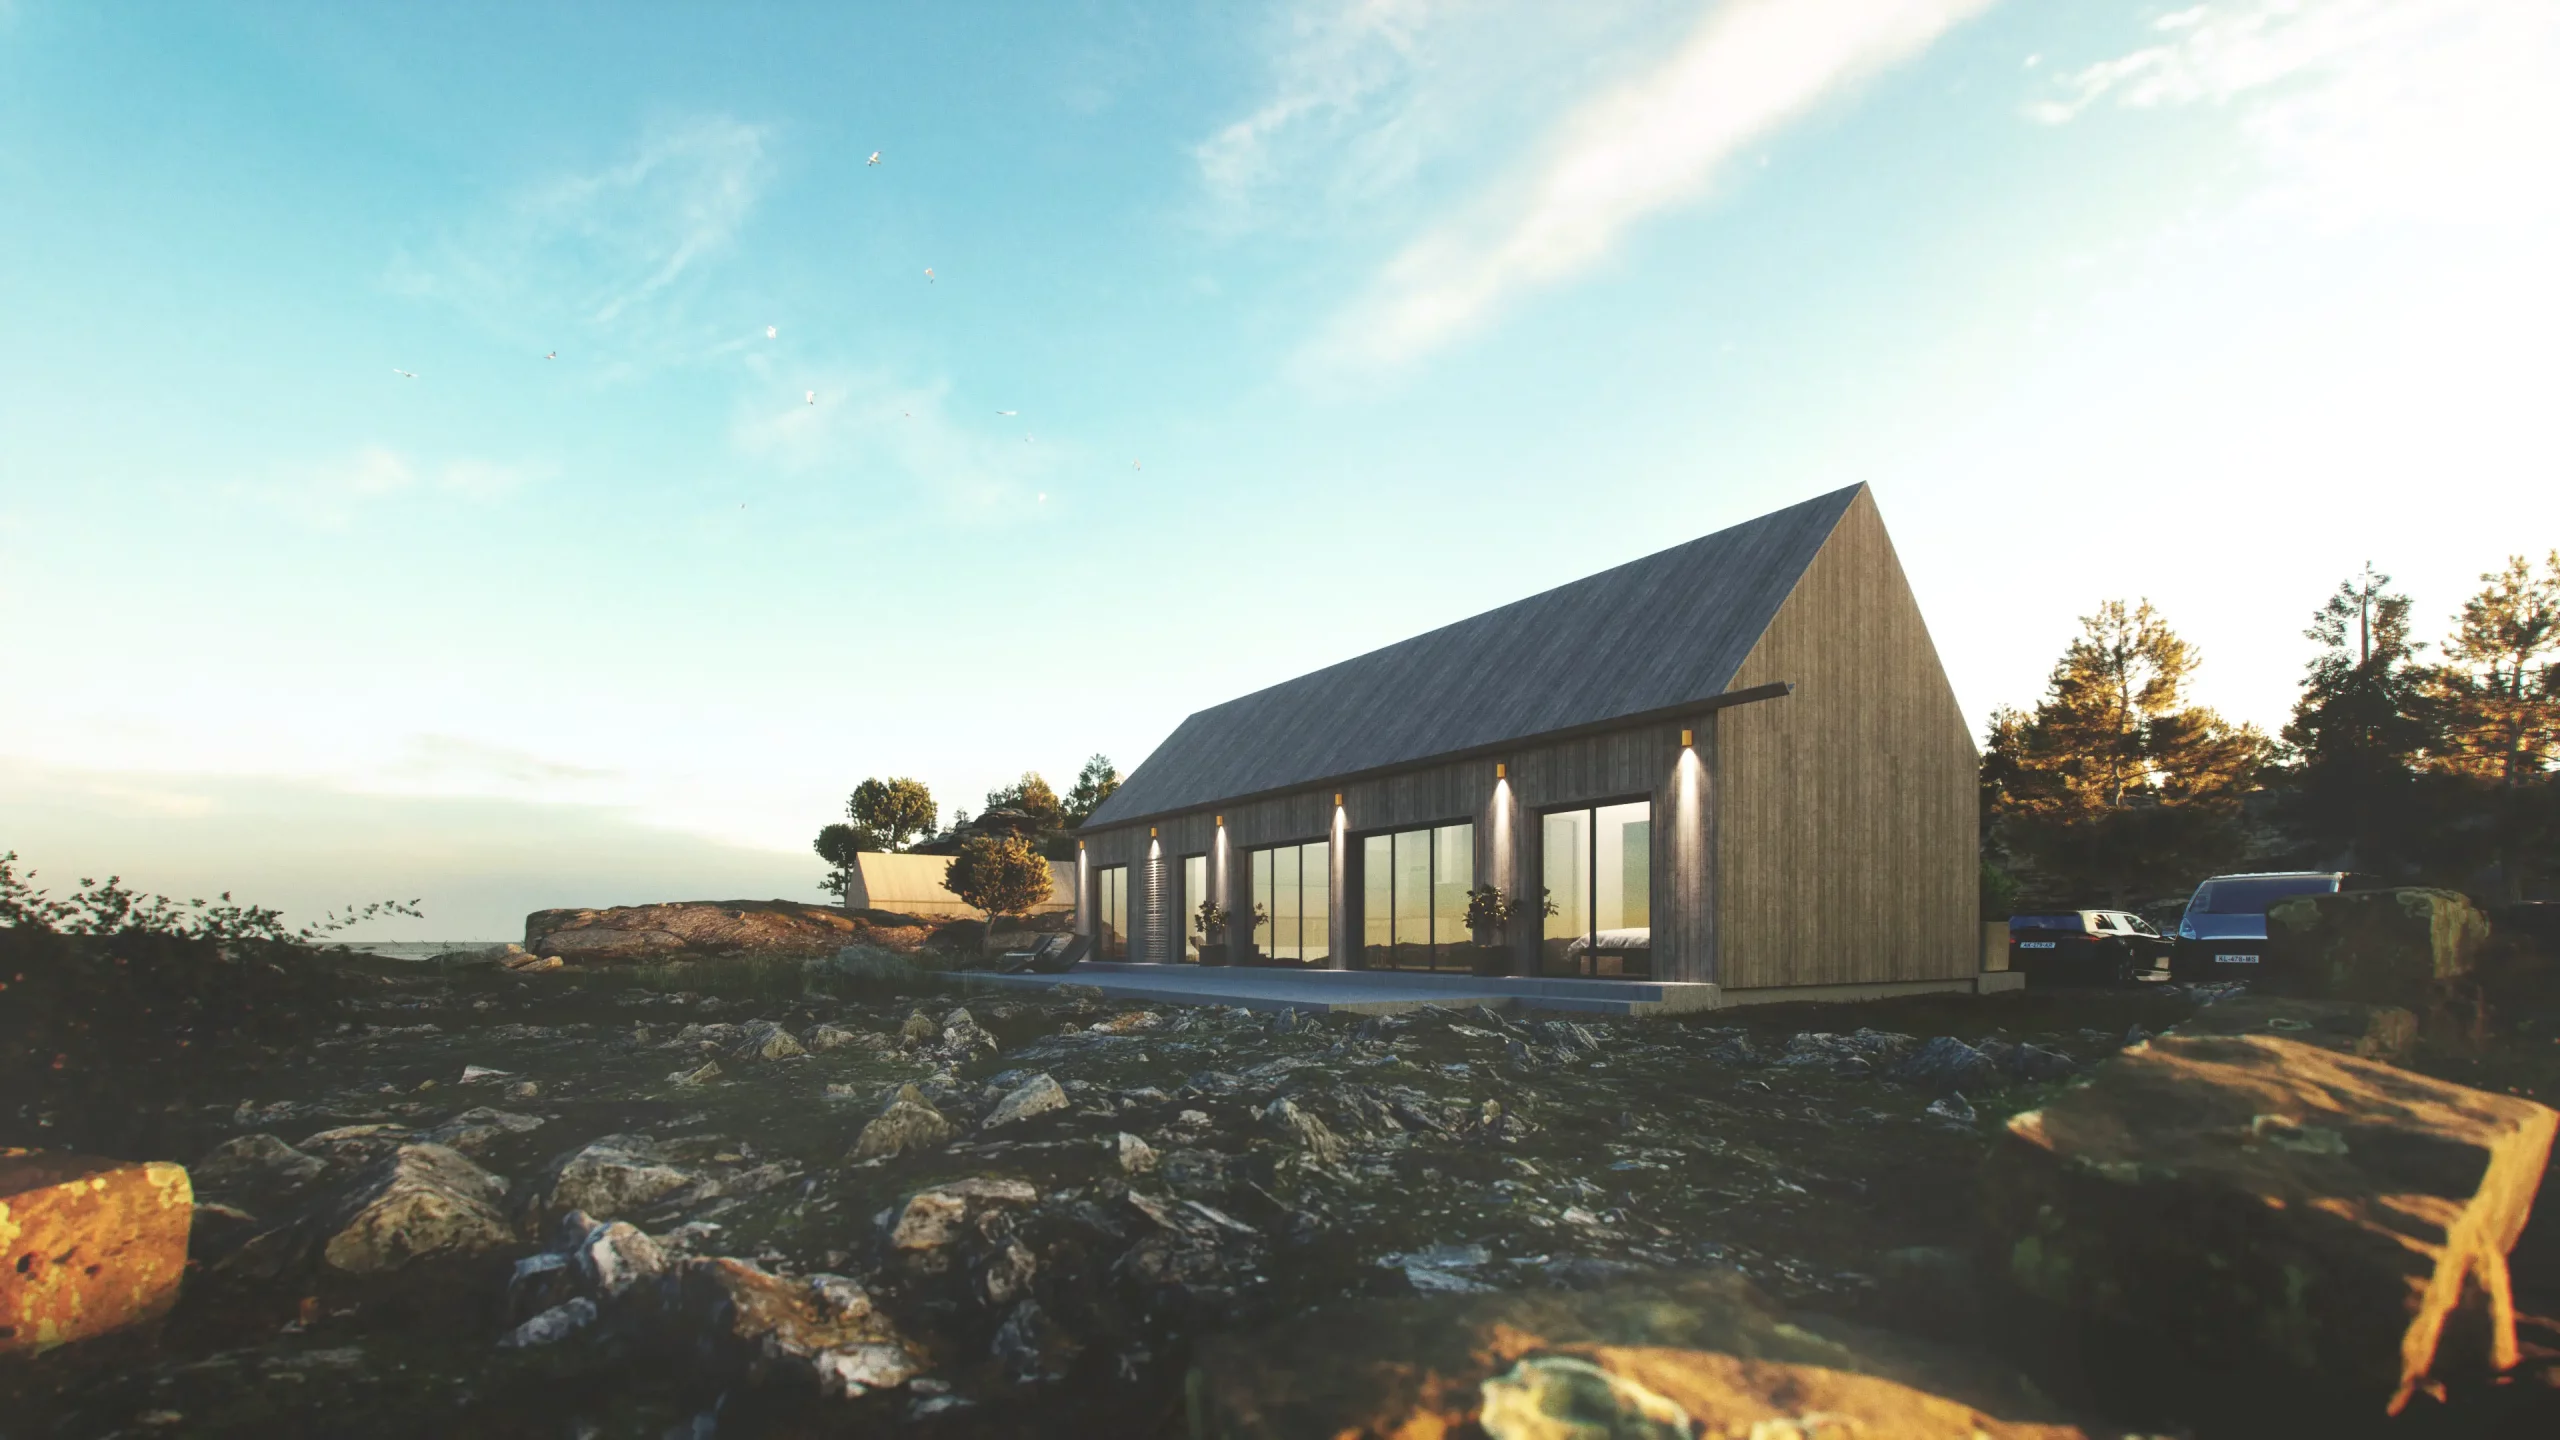 3D Architectural Render in a photo realistic style of a house on the Swedish island of Gotland.